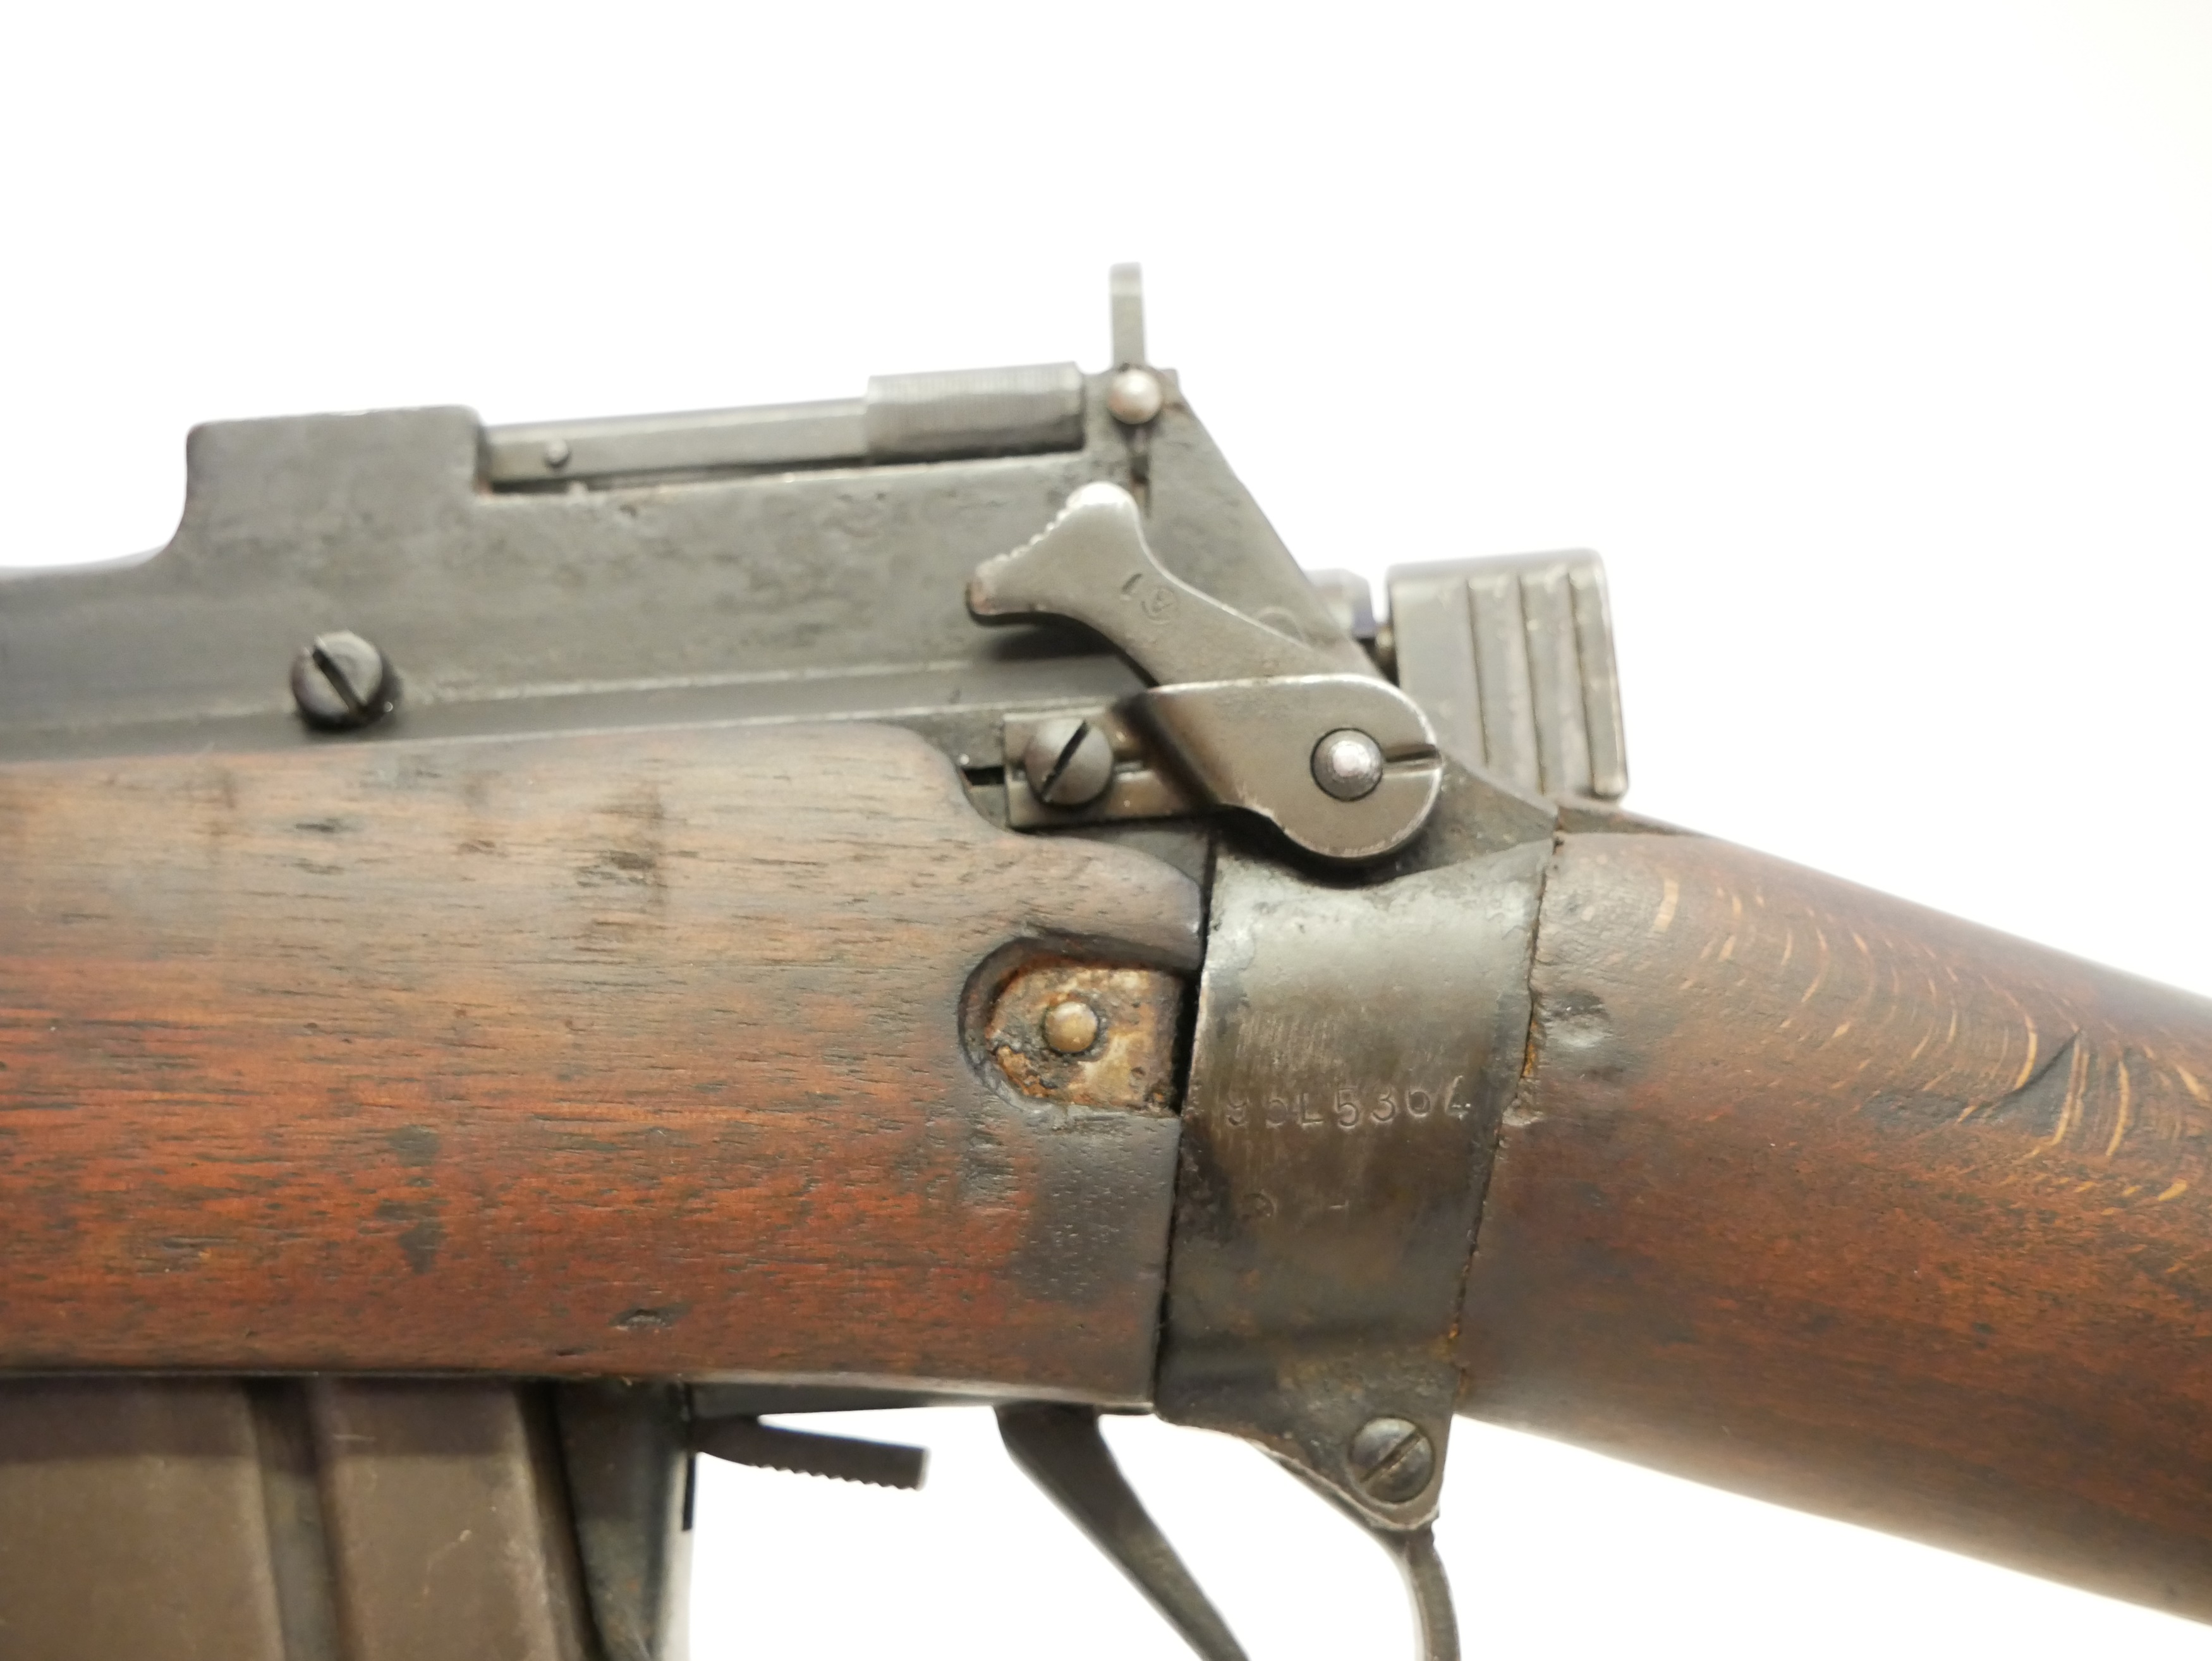 Deactivated Lee-Enfield no4 mk1 rifle 1944 dated Long Branch made SOLD